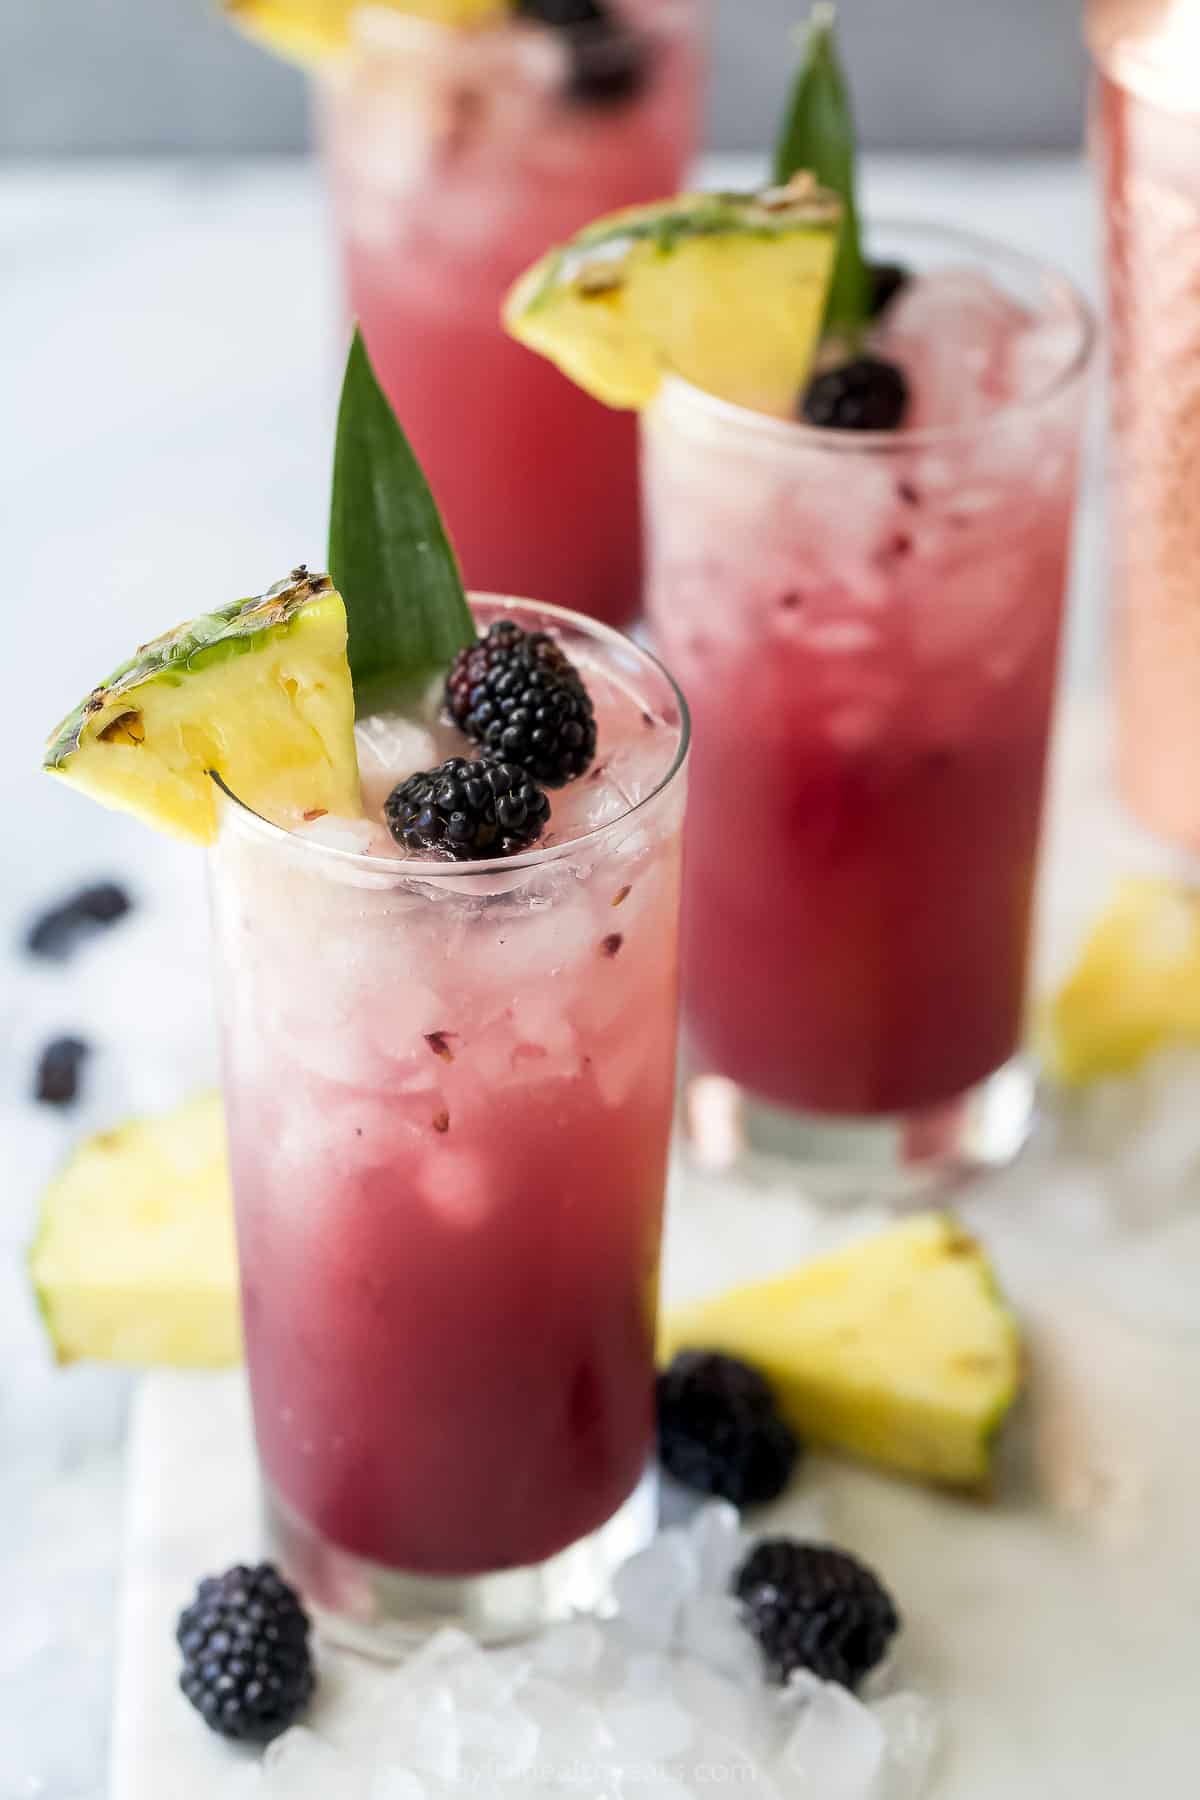 Three pineapple ginger beer mocktails on a cutting board with fresh blackberries and pineapple slices